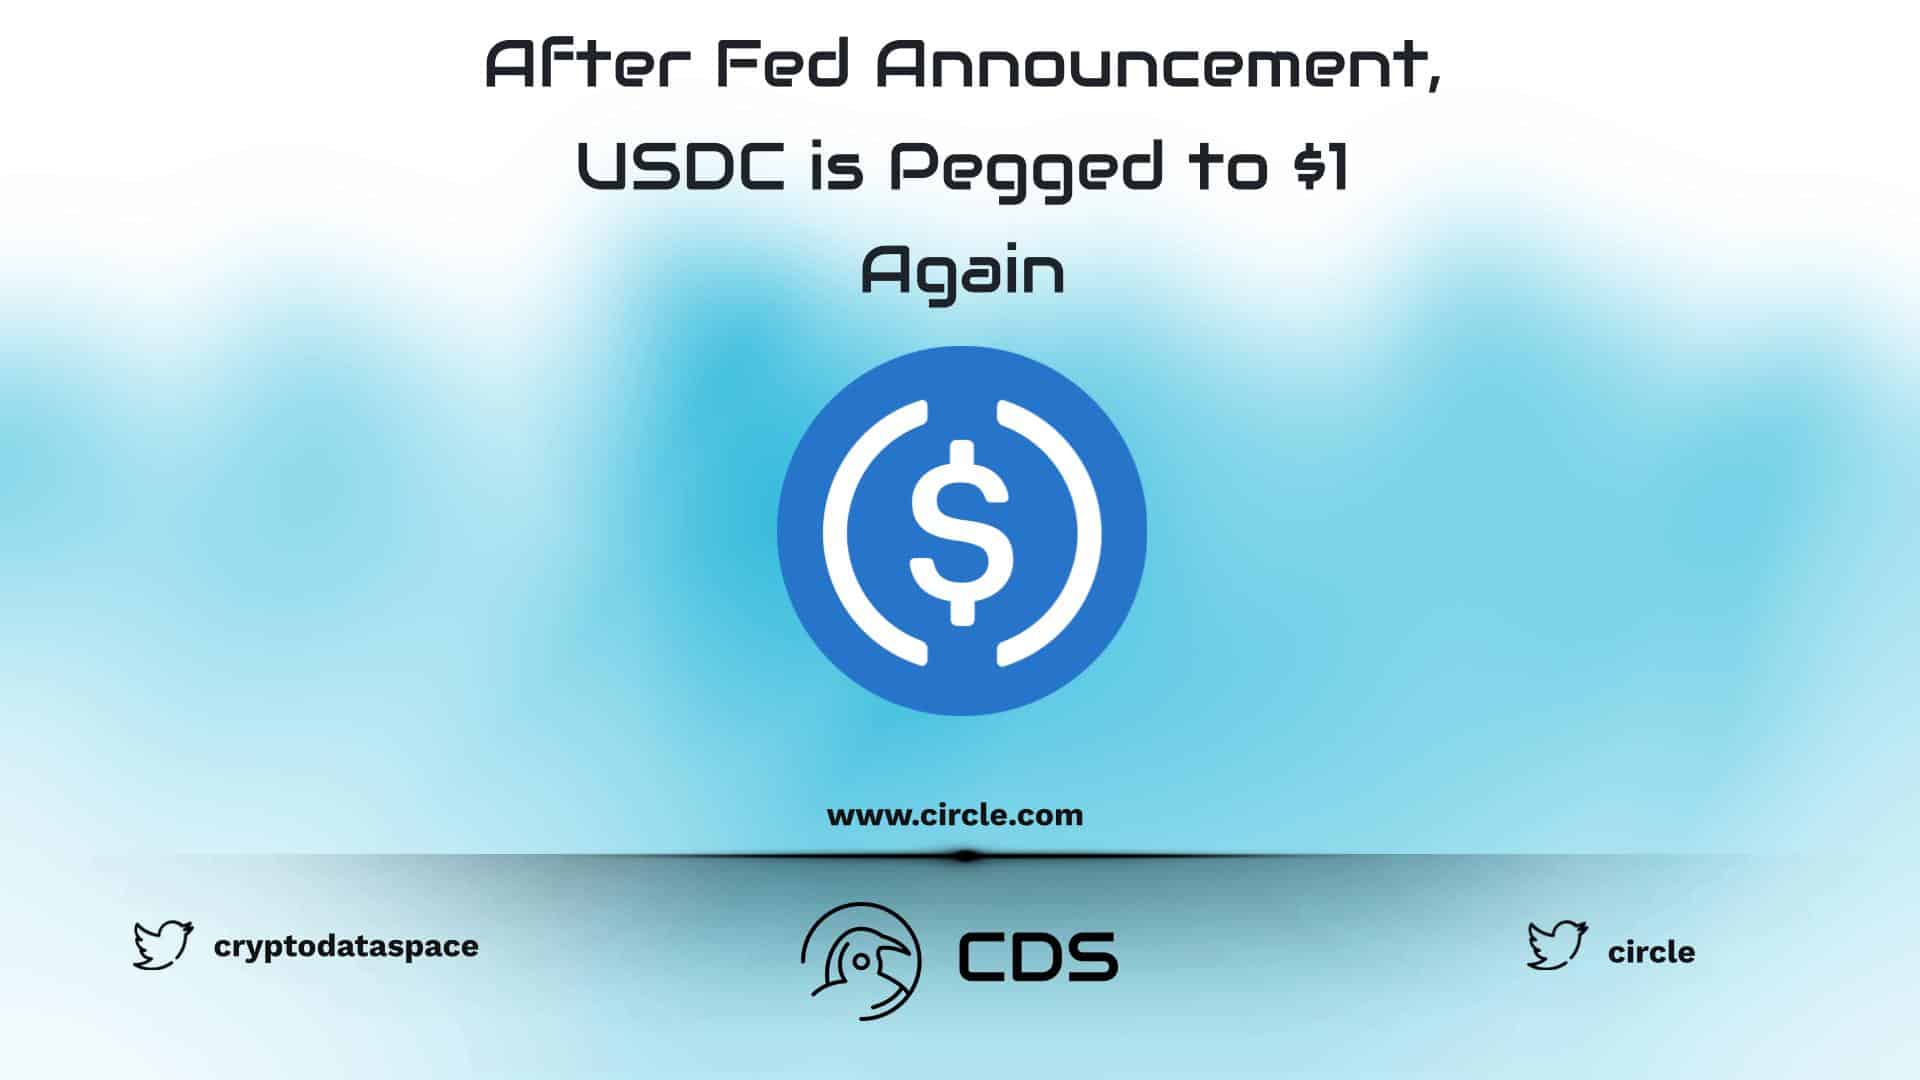 After Fed Announcement, USDC is Pegged to $1 Again